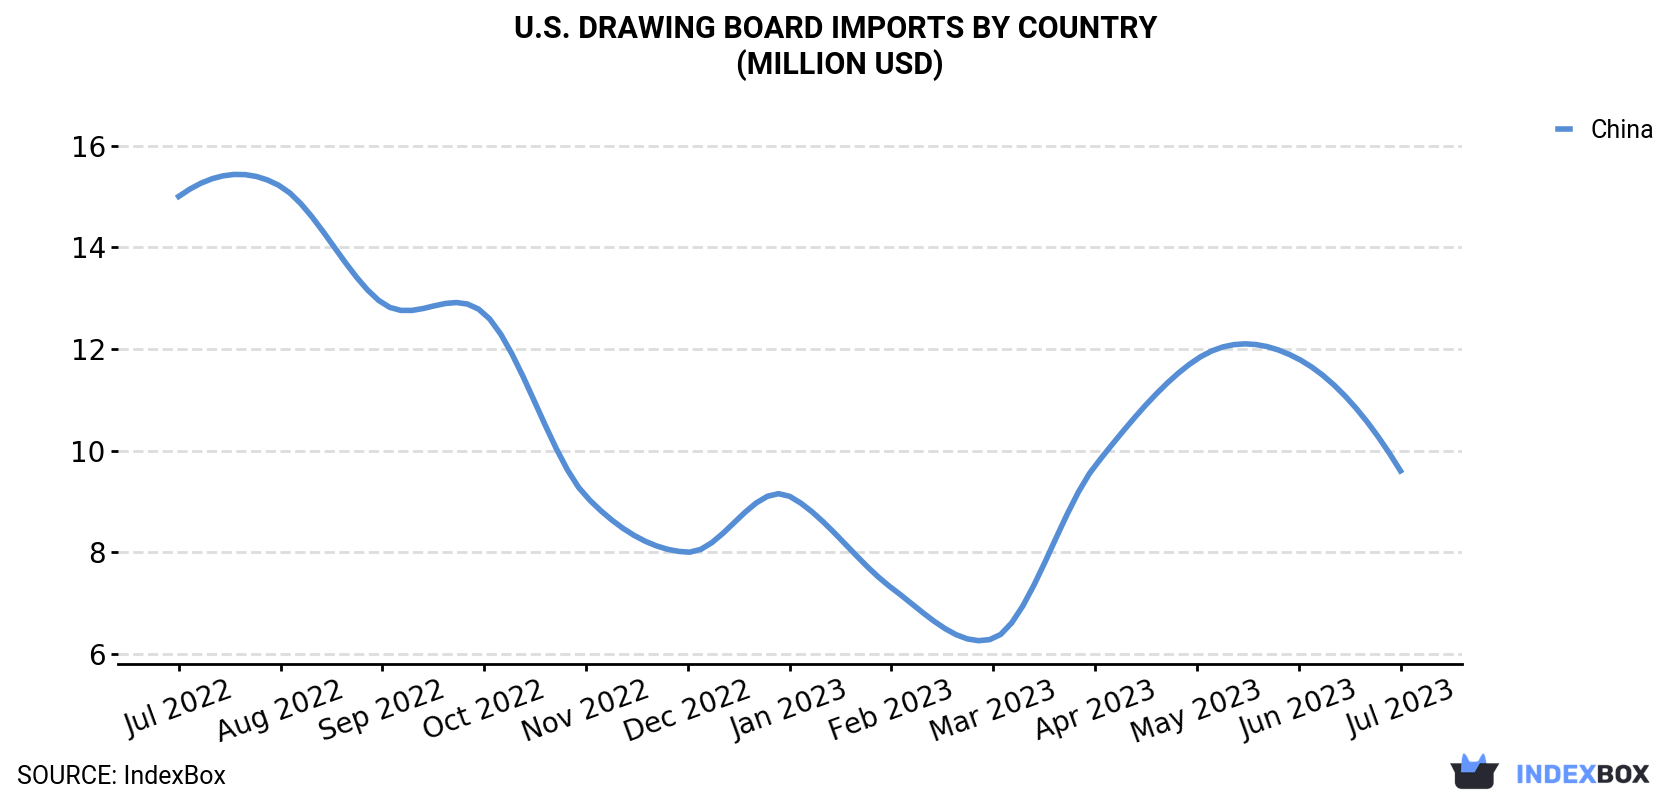 U.S. Drawing Board Imports By Country (Million USD)